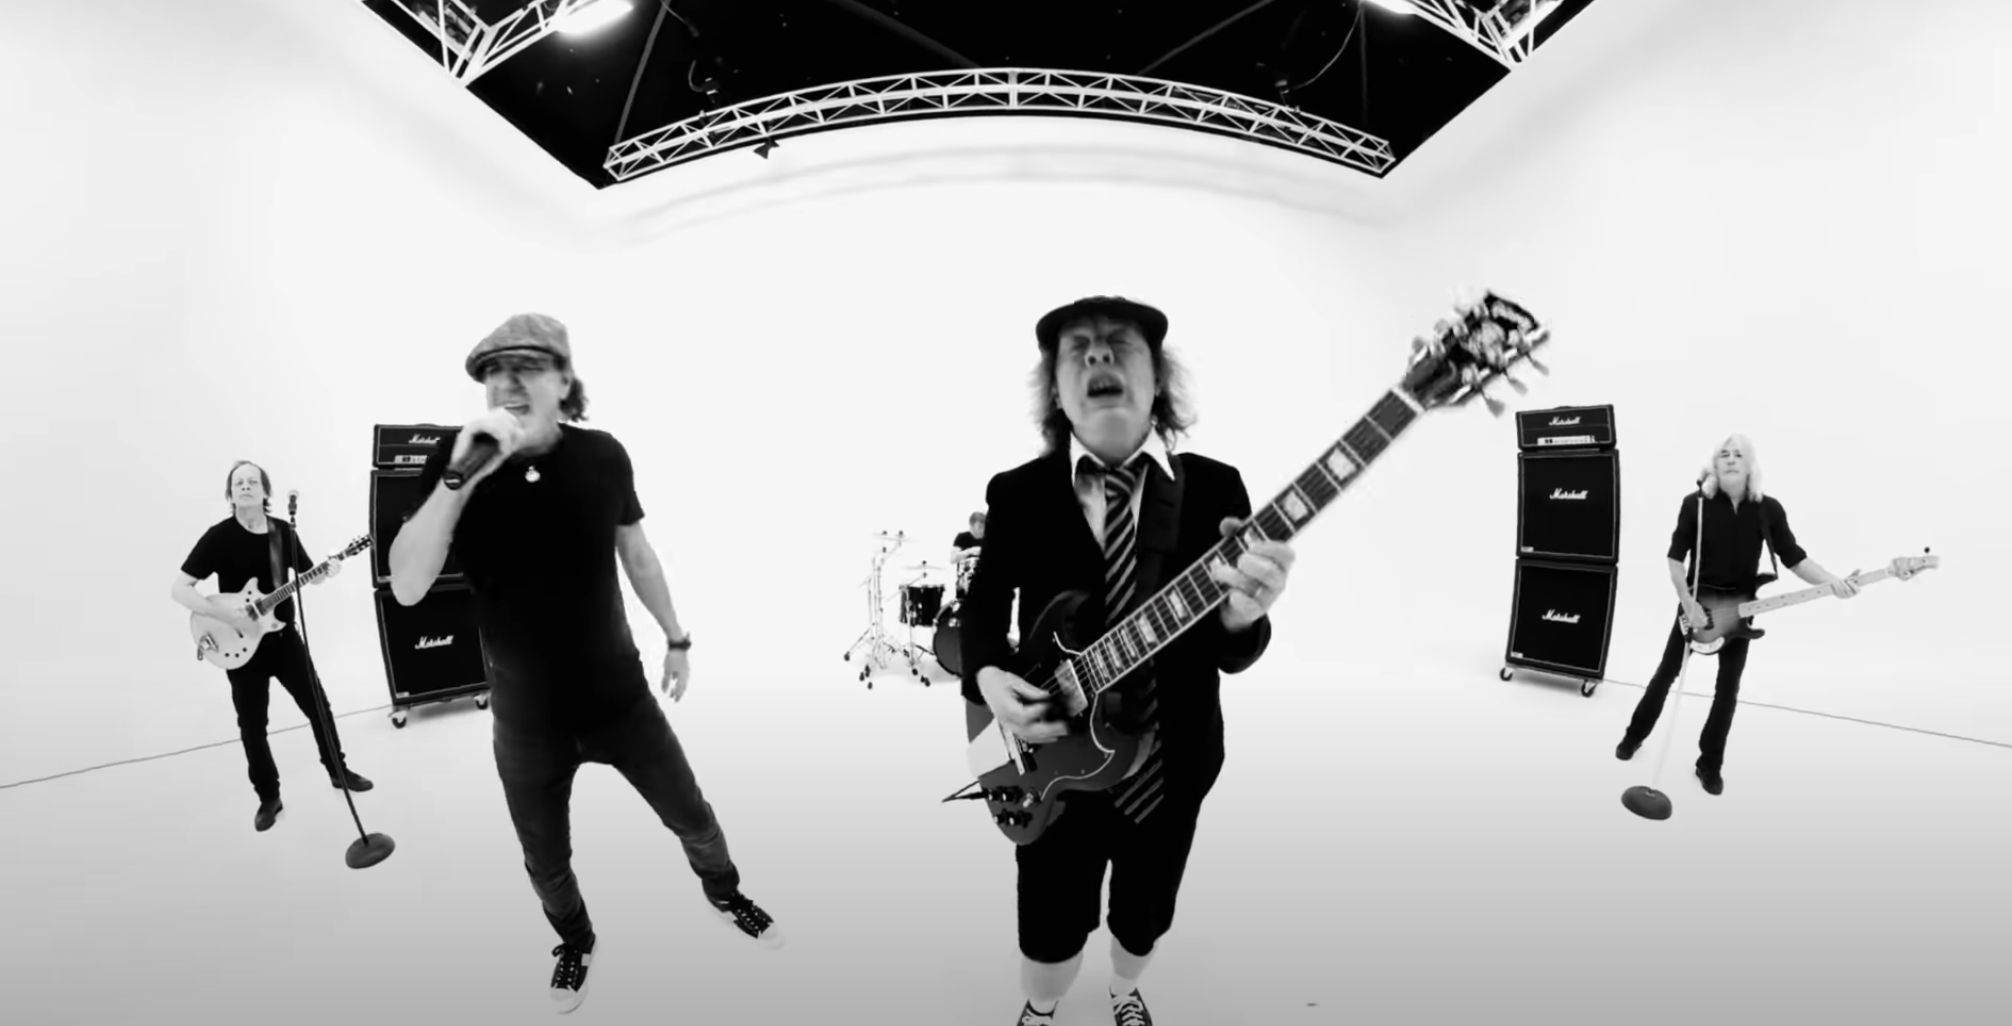 Watch The New Video For AC/DC’s “Realize” (VIDEO)